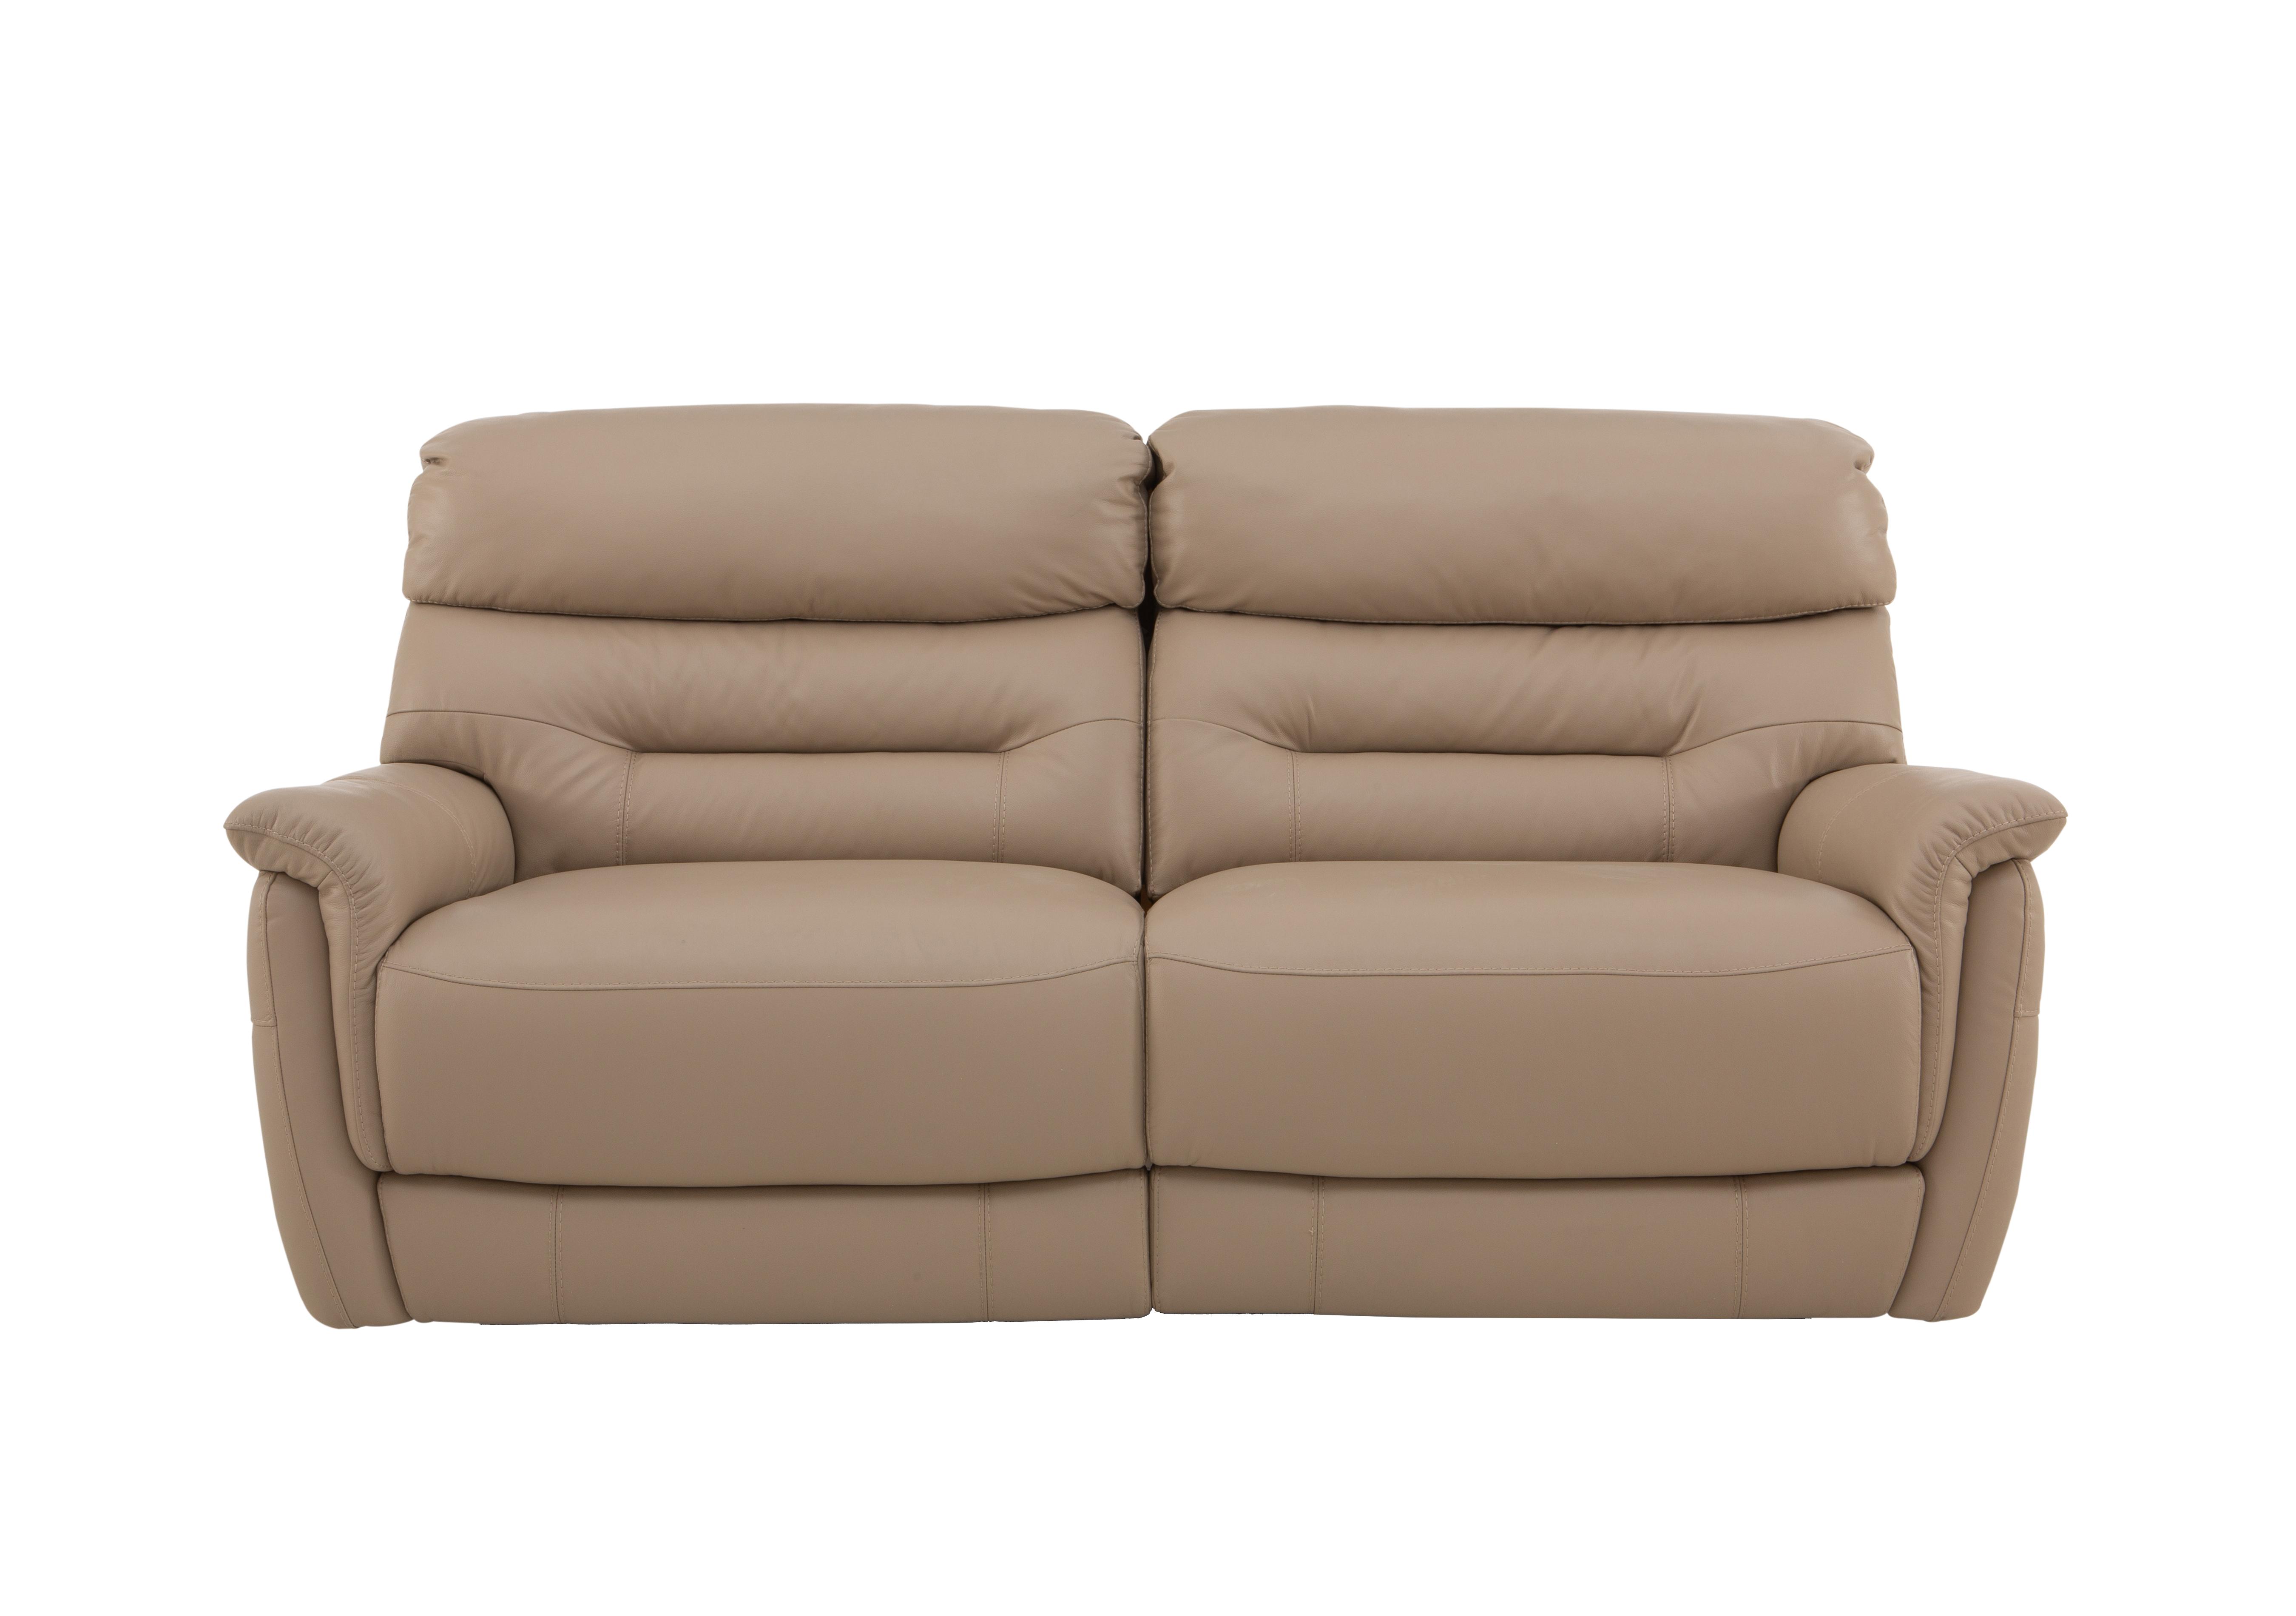 Chicago 3 Seater Leather Sofa in Bv-039c Pebble on Furniture Village